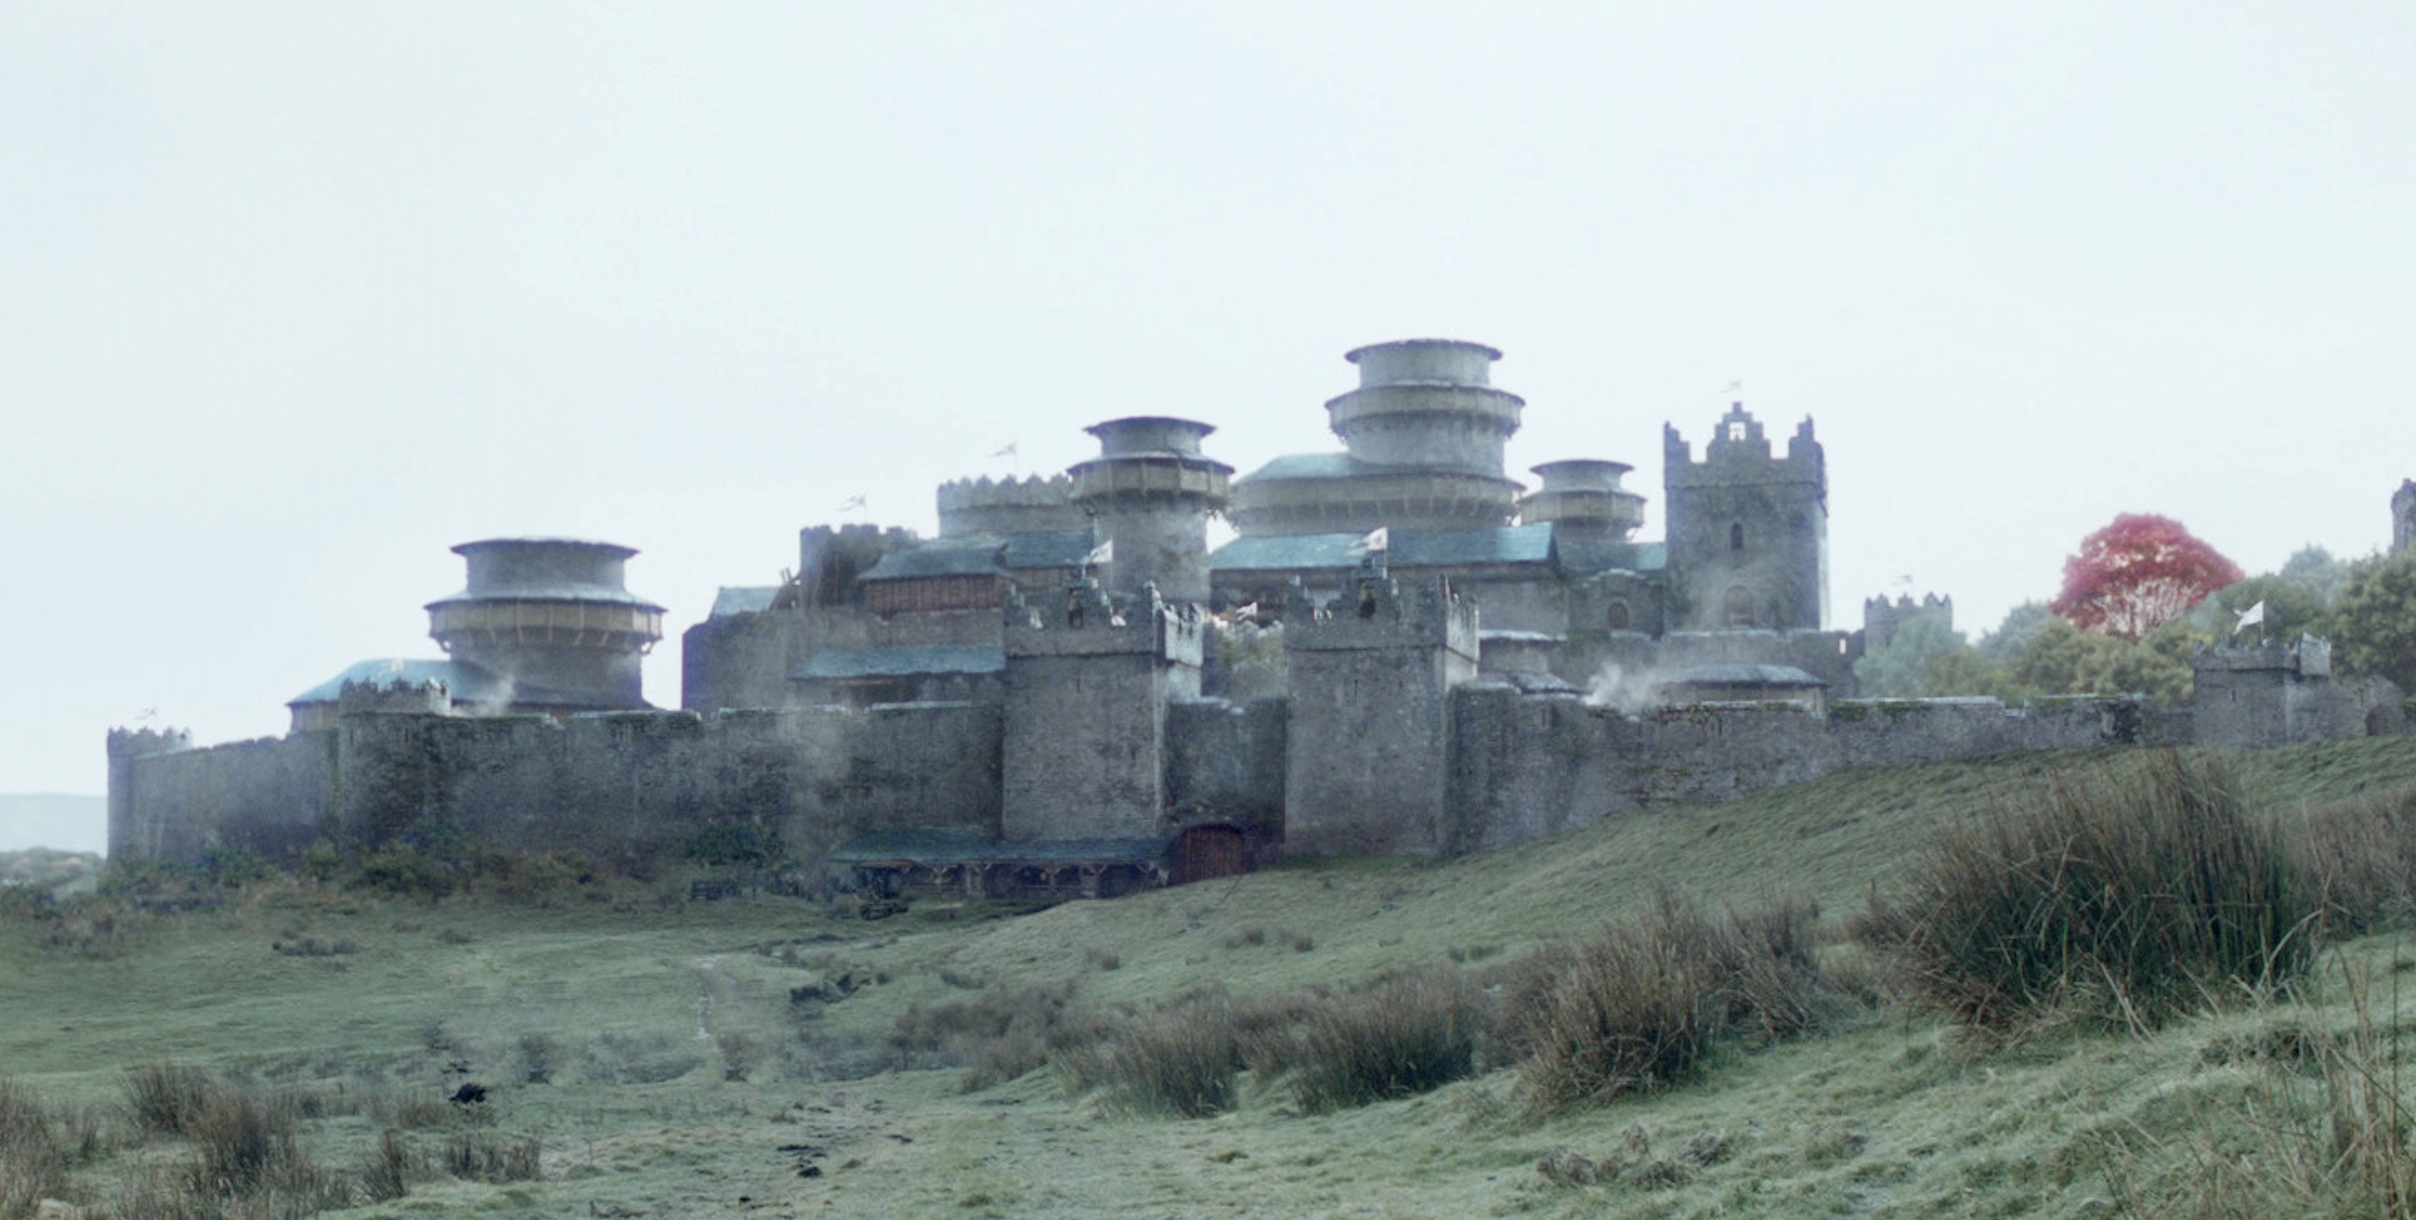 Winterfell castle from &quot;Game of Thrones&quot;